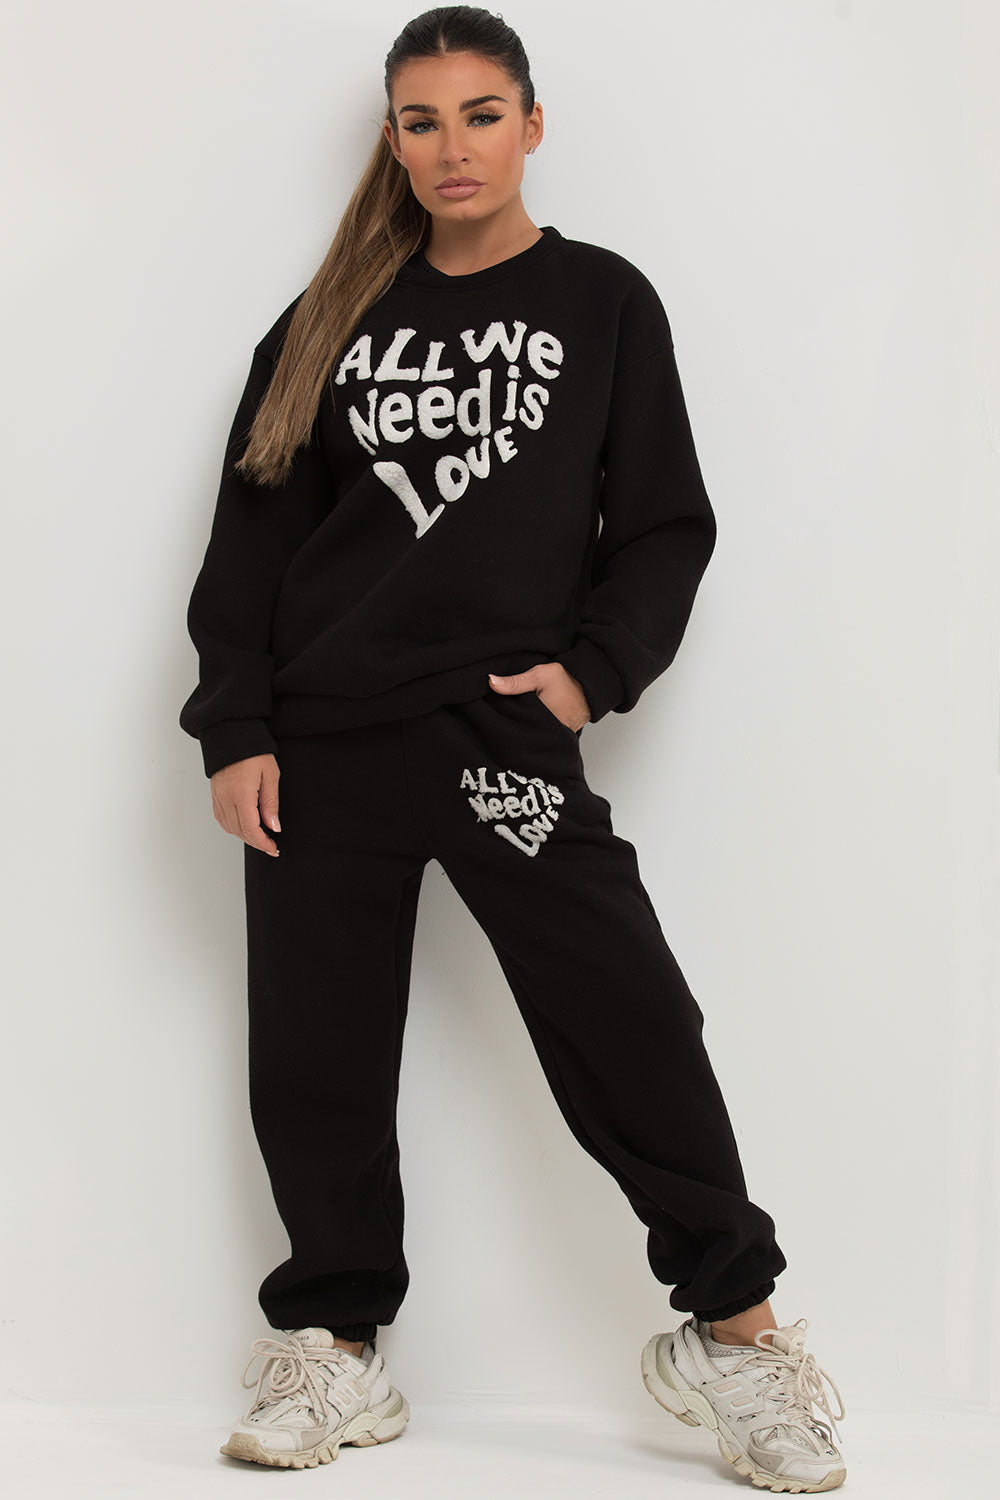 all we need is love towelling oversized loungewear co ord set